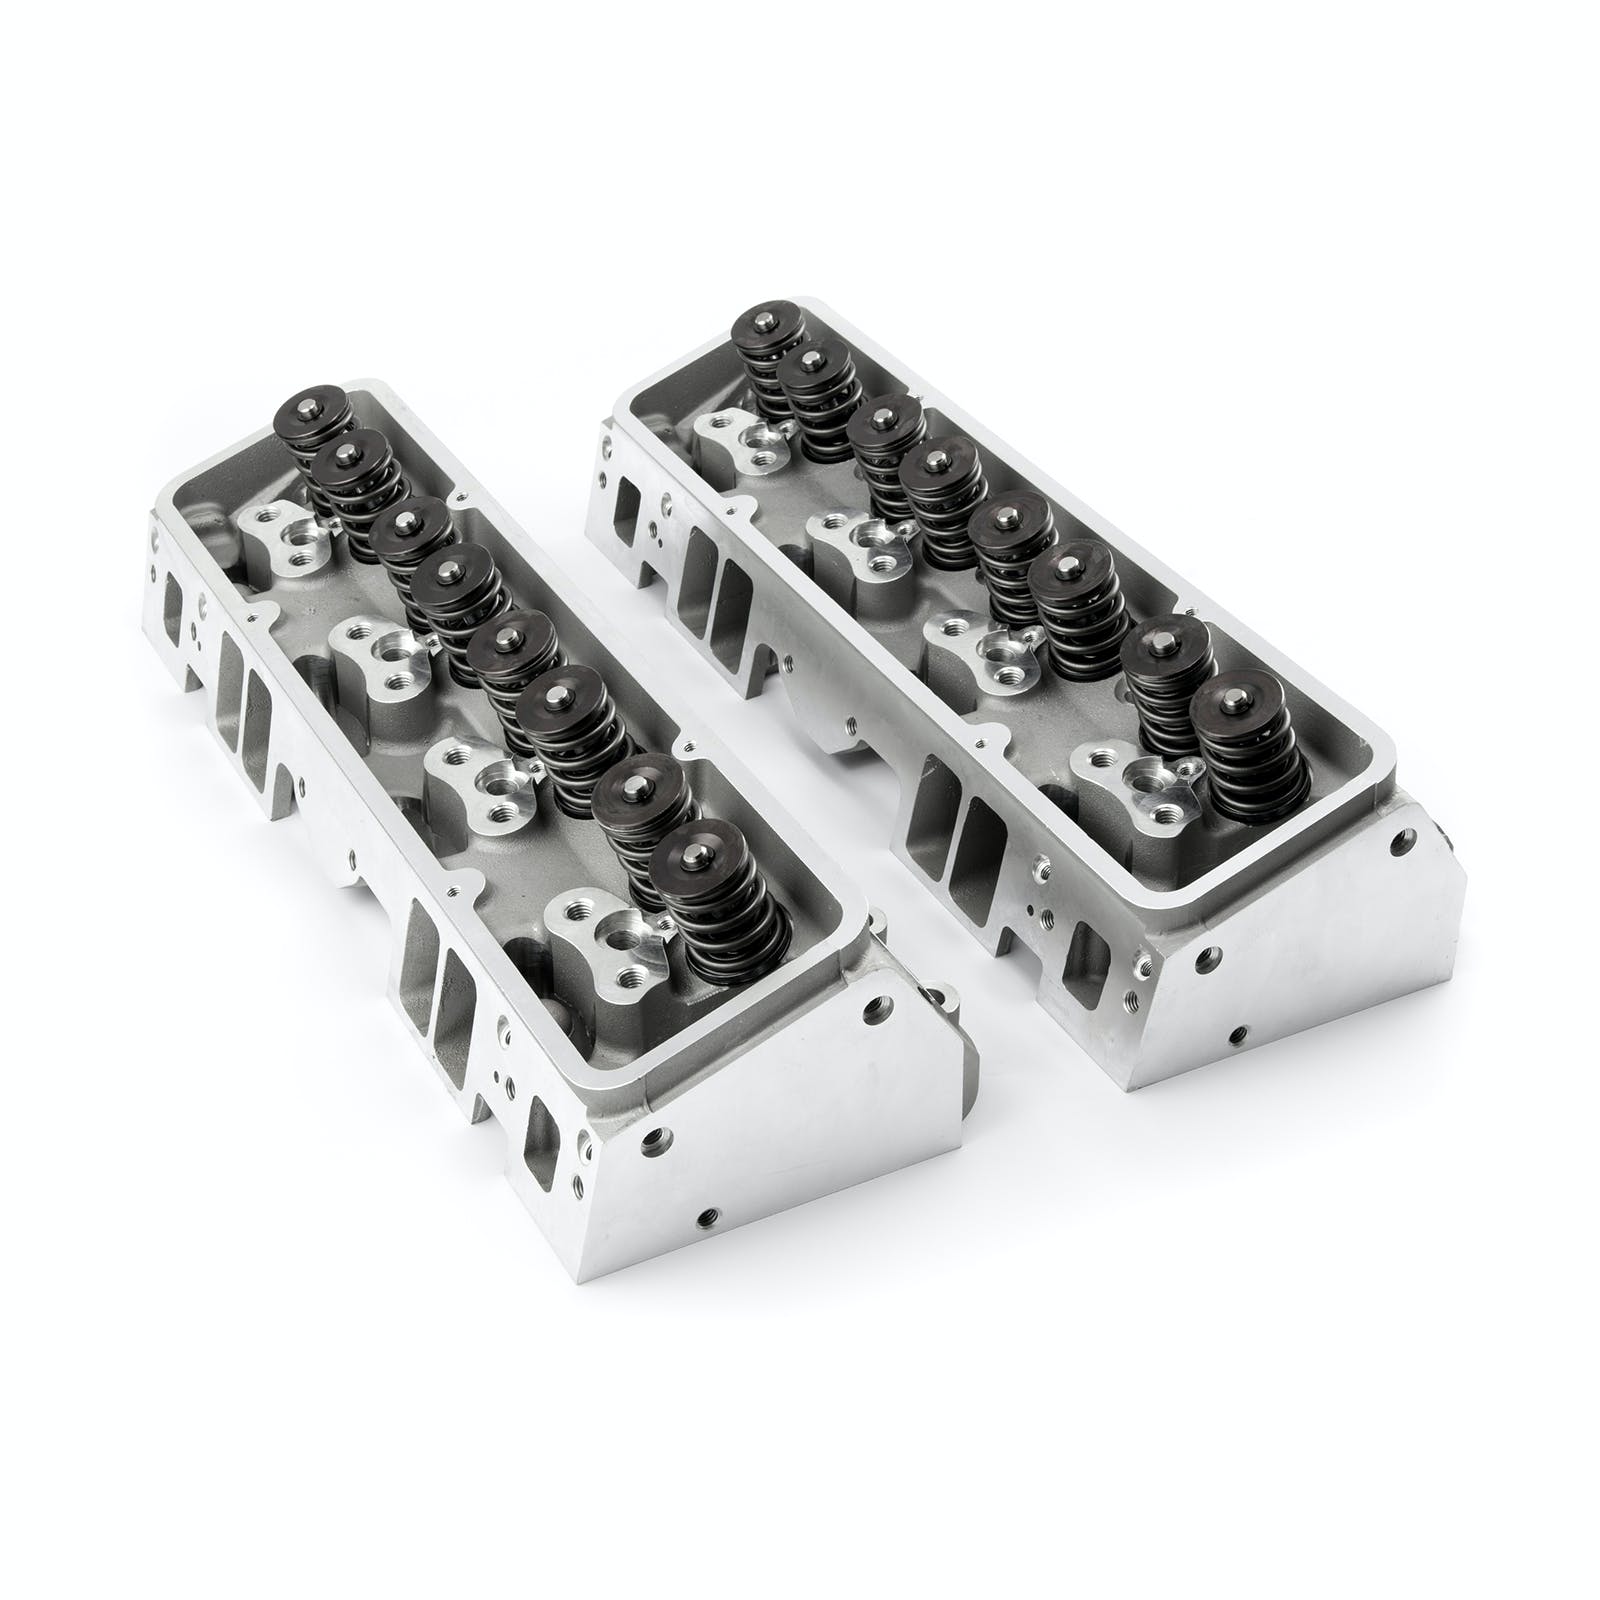 Speedmaster PCE281.2008 205cc 64cc Angle Solid-FT Complete Aluminum Cylinder Heads